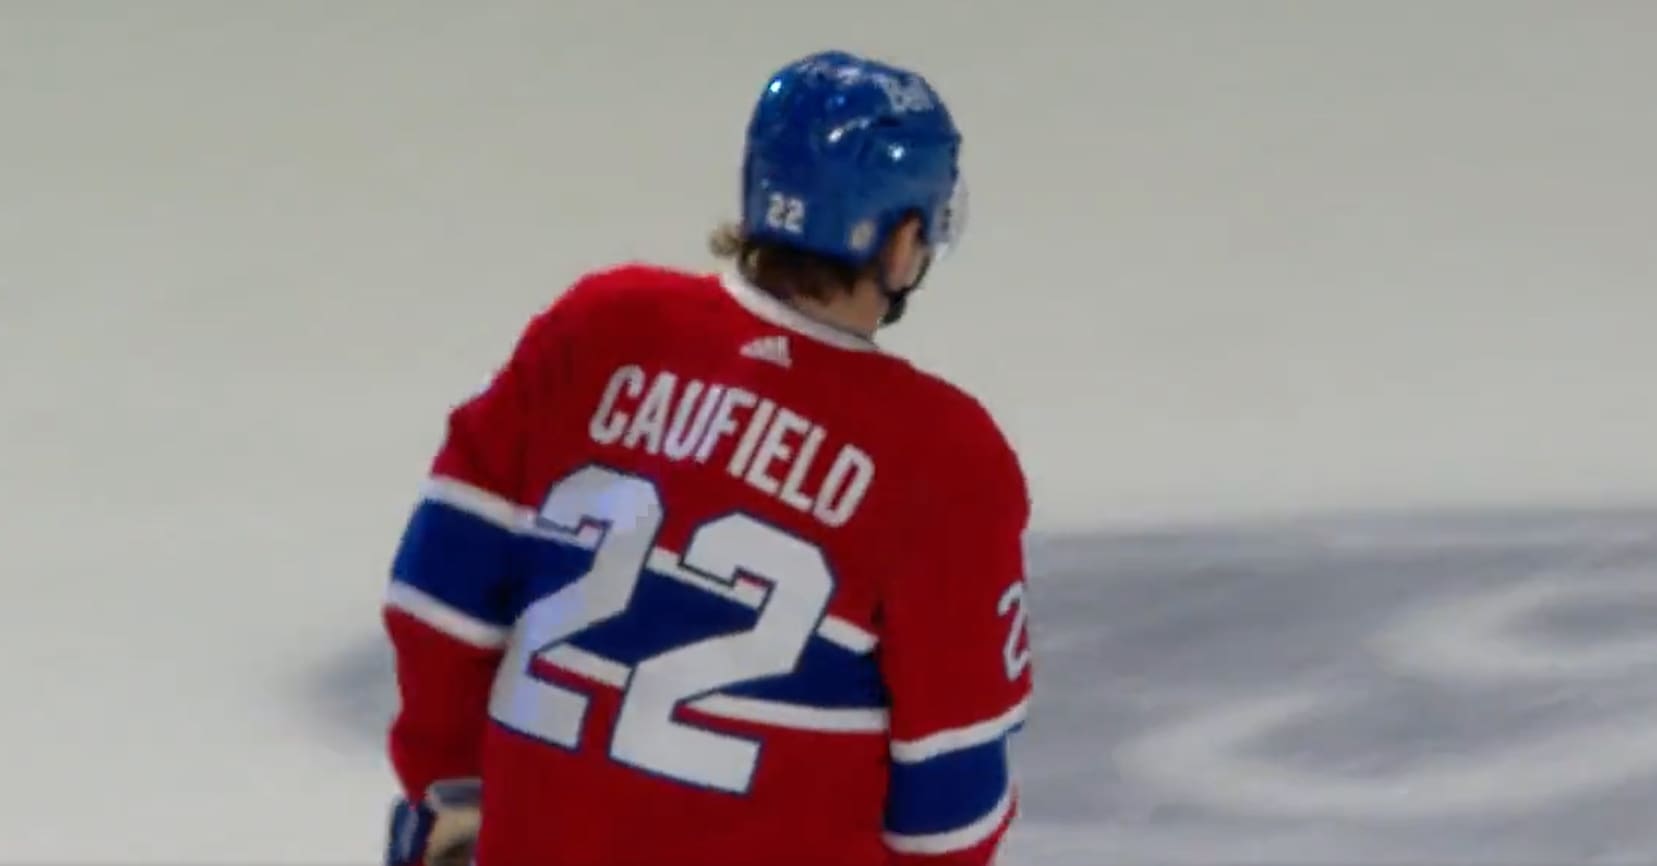 Canadiens: Cole Caufield over the moon after scoring first NHL goal